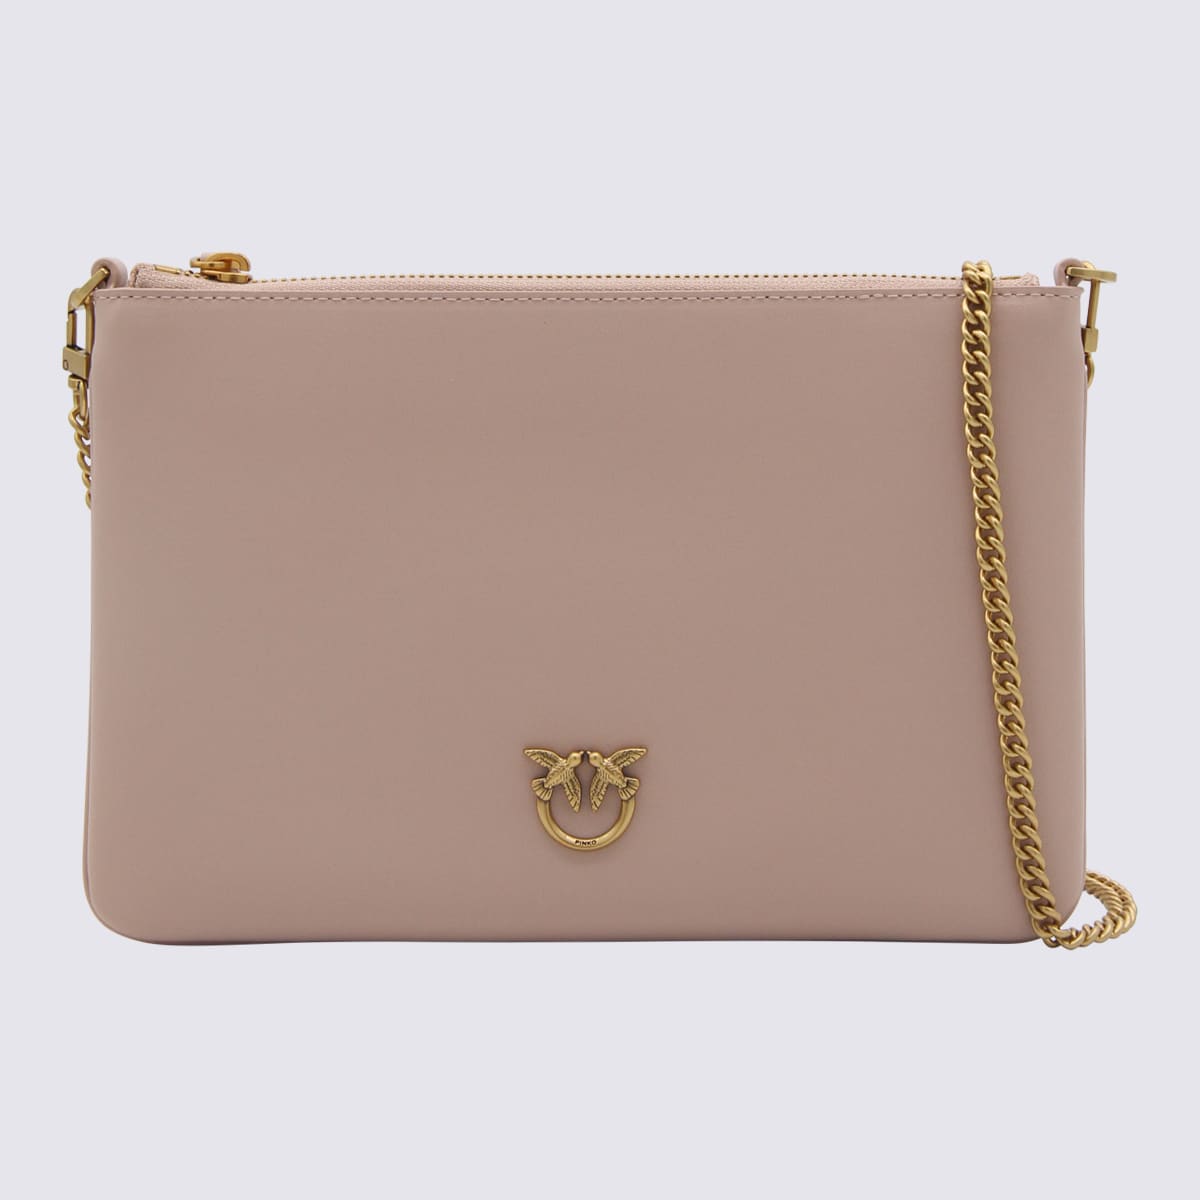 Pinko Powder Pink Leather Classic Flat Love Wallet Chain